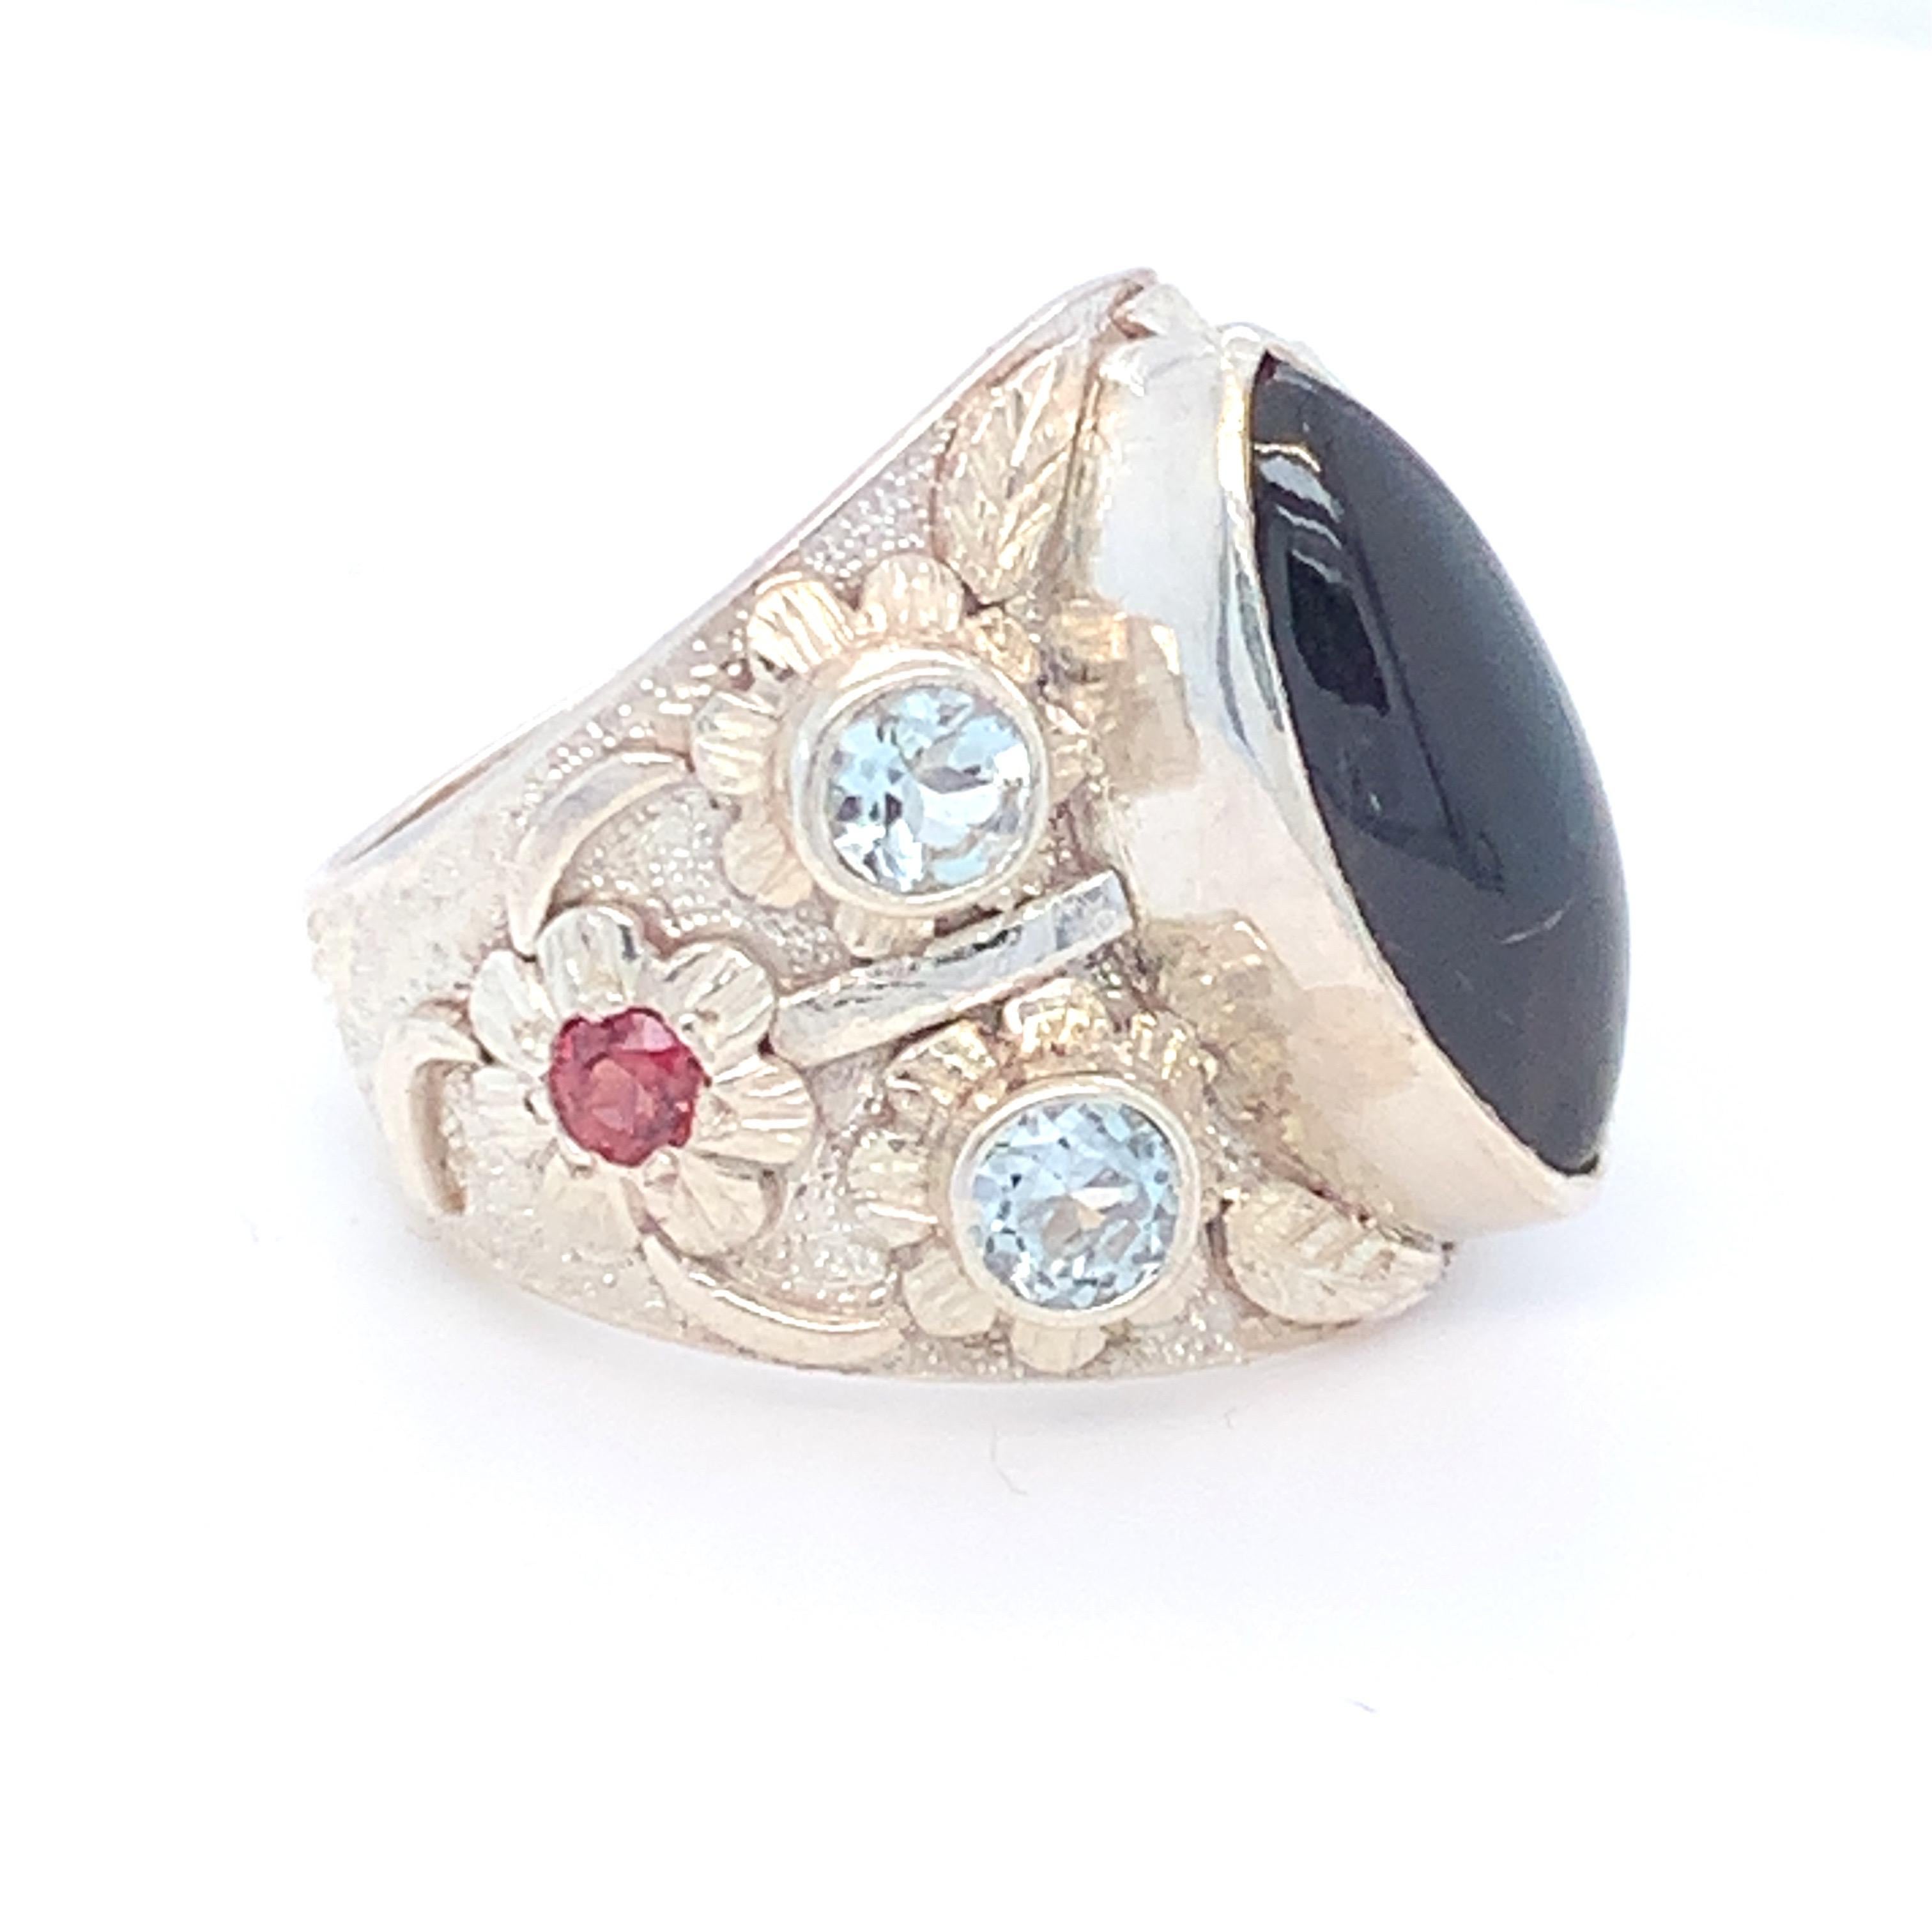 Marquise cabochon  Iolite is the center stone with symmetrical settings of round aquamarine and Tourmaline  on both sides of this stunning, one of a kind cocktail ring. Floral motifs on the sides gives it a feminine touch. Set in sterling silver and